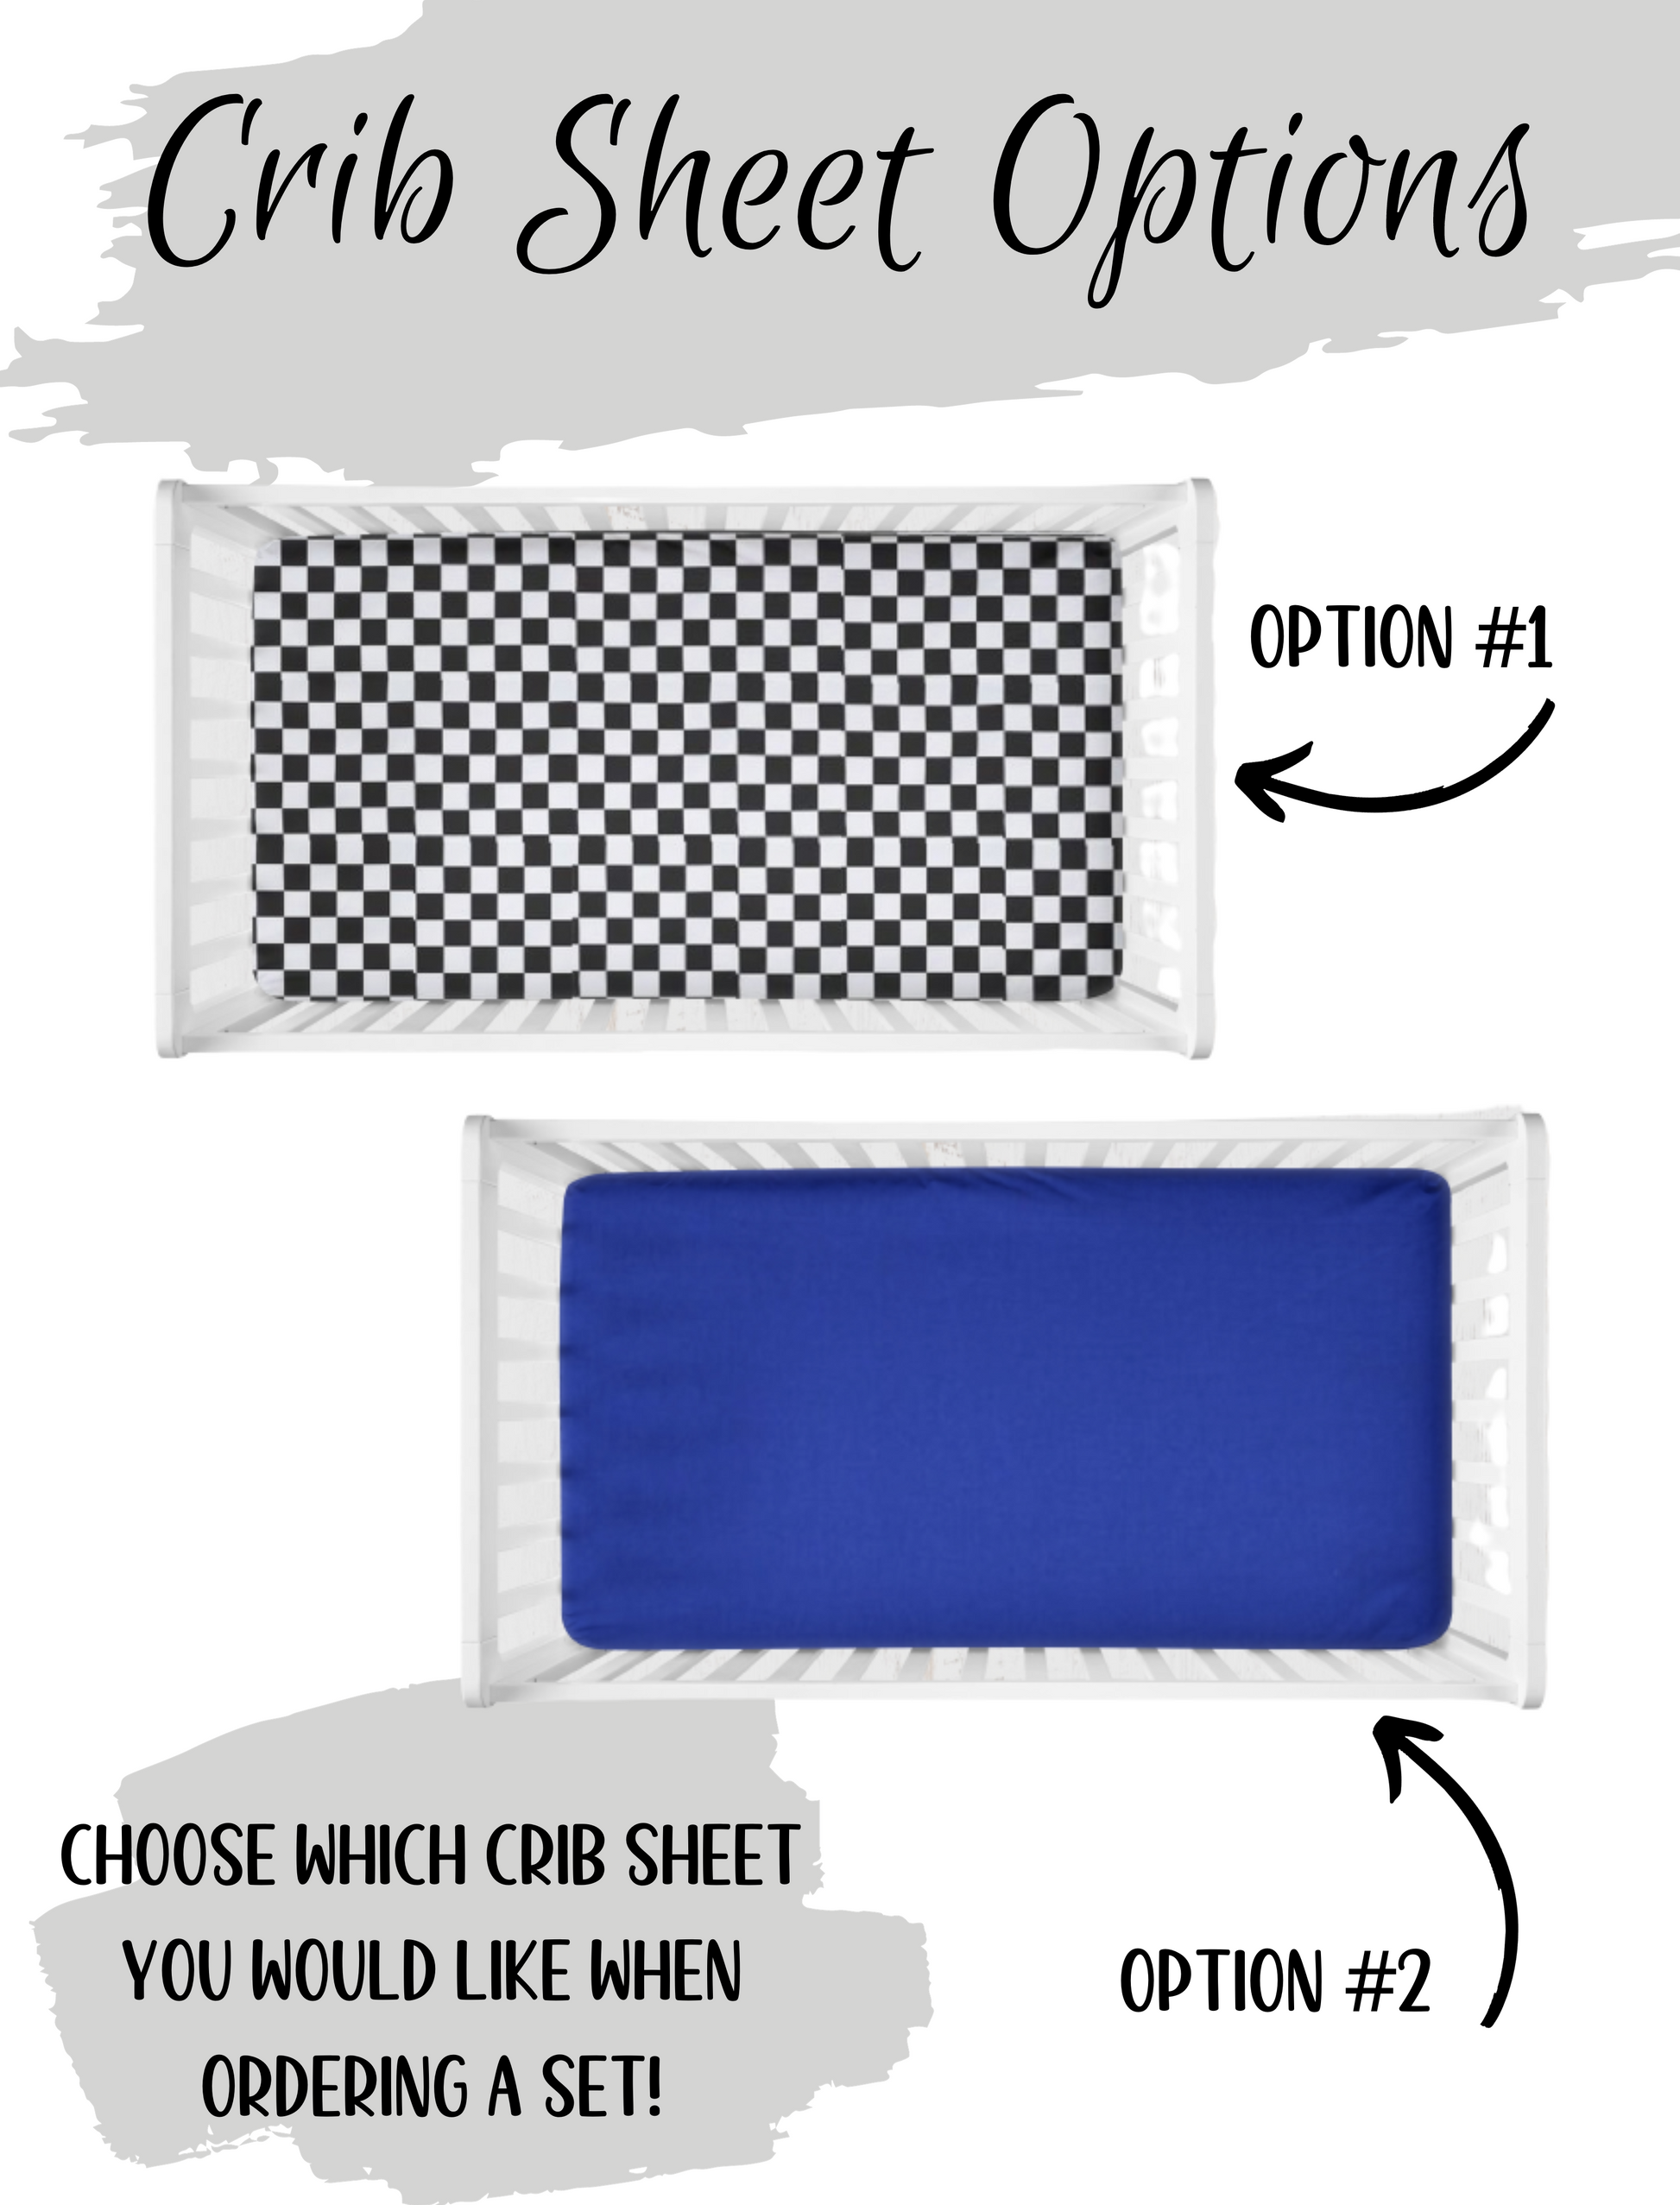 choose between the checkered sheet and the blue crib sheet for the set